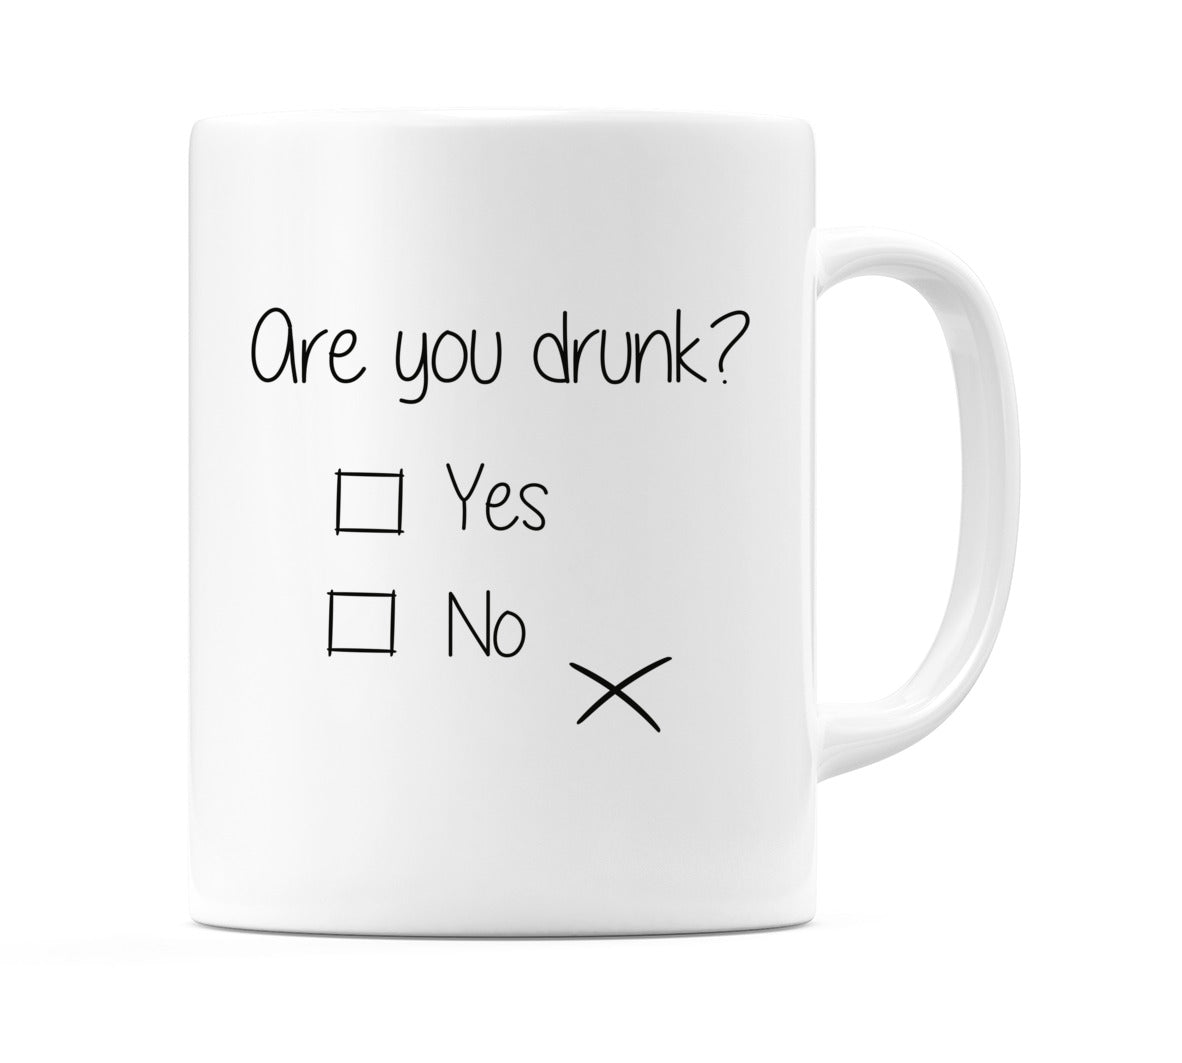 Are you drunk? Yes - No Mug